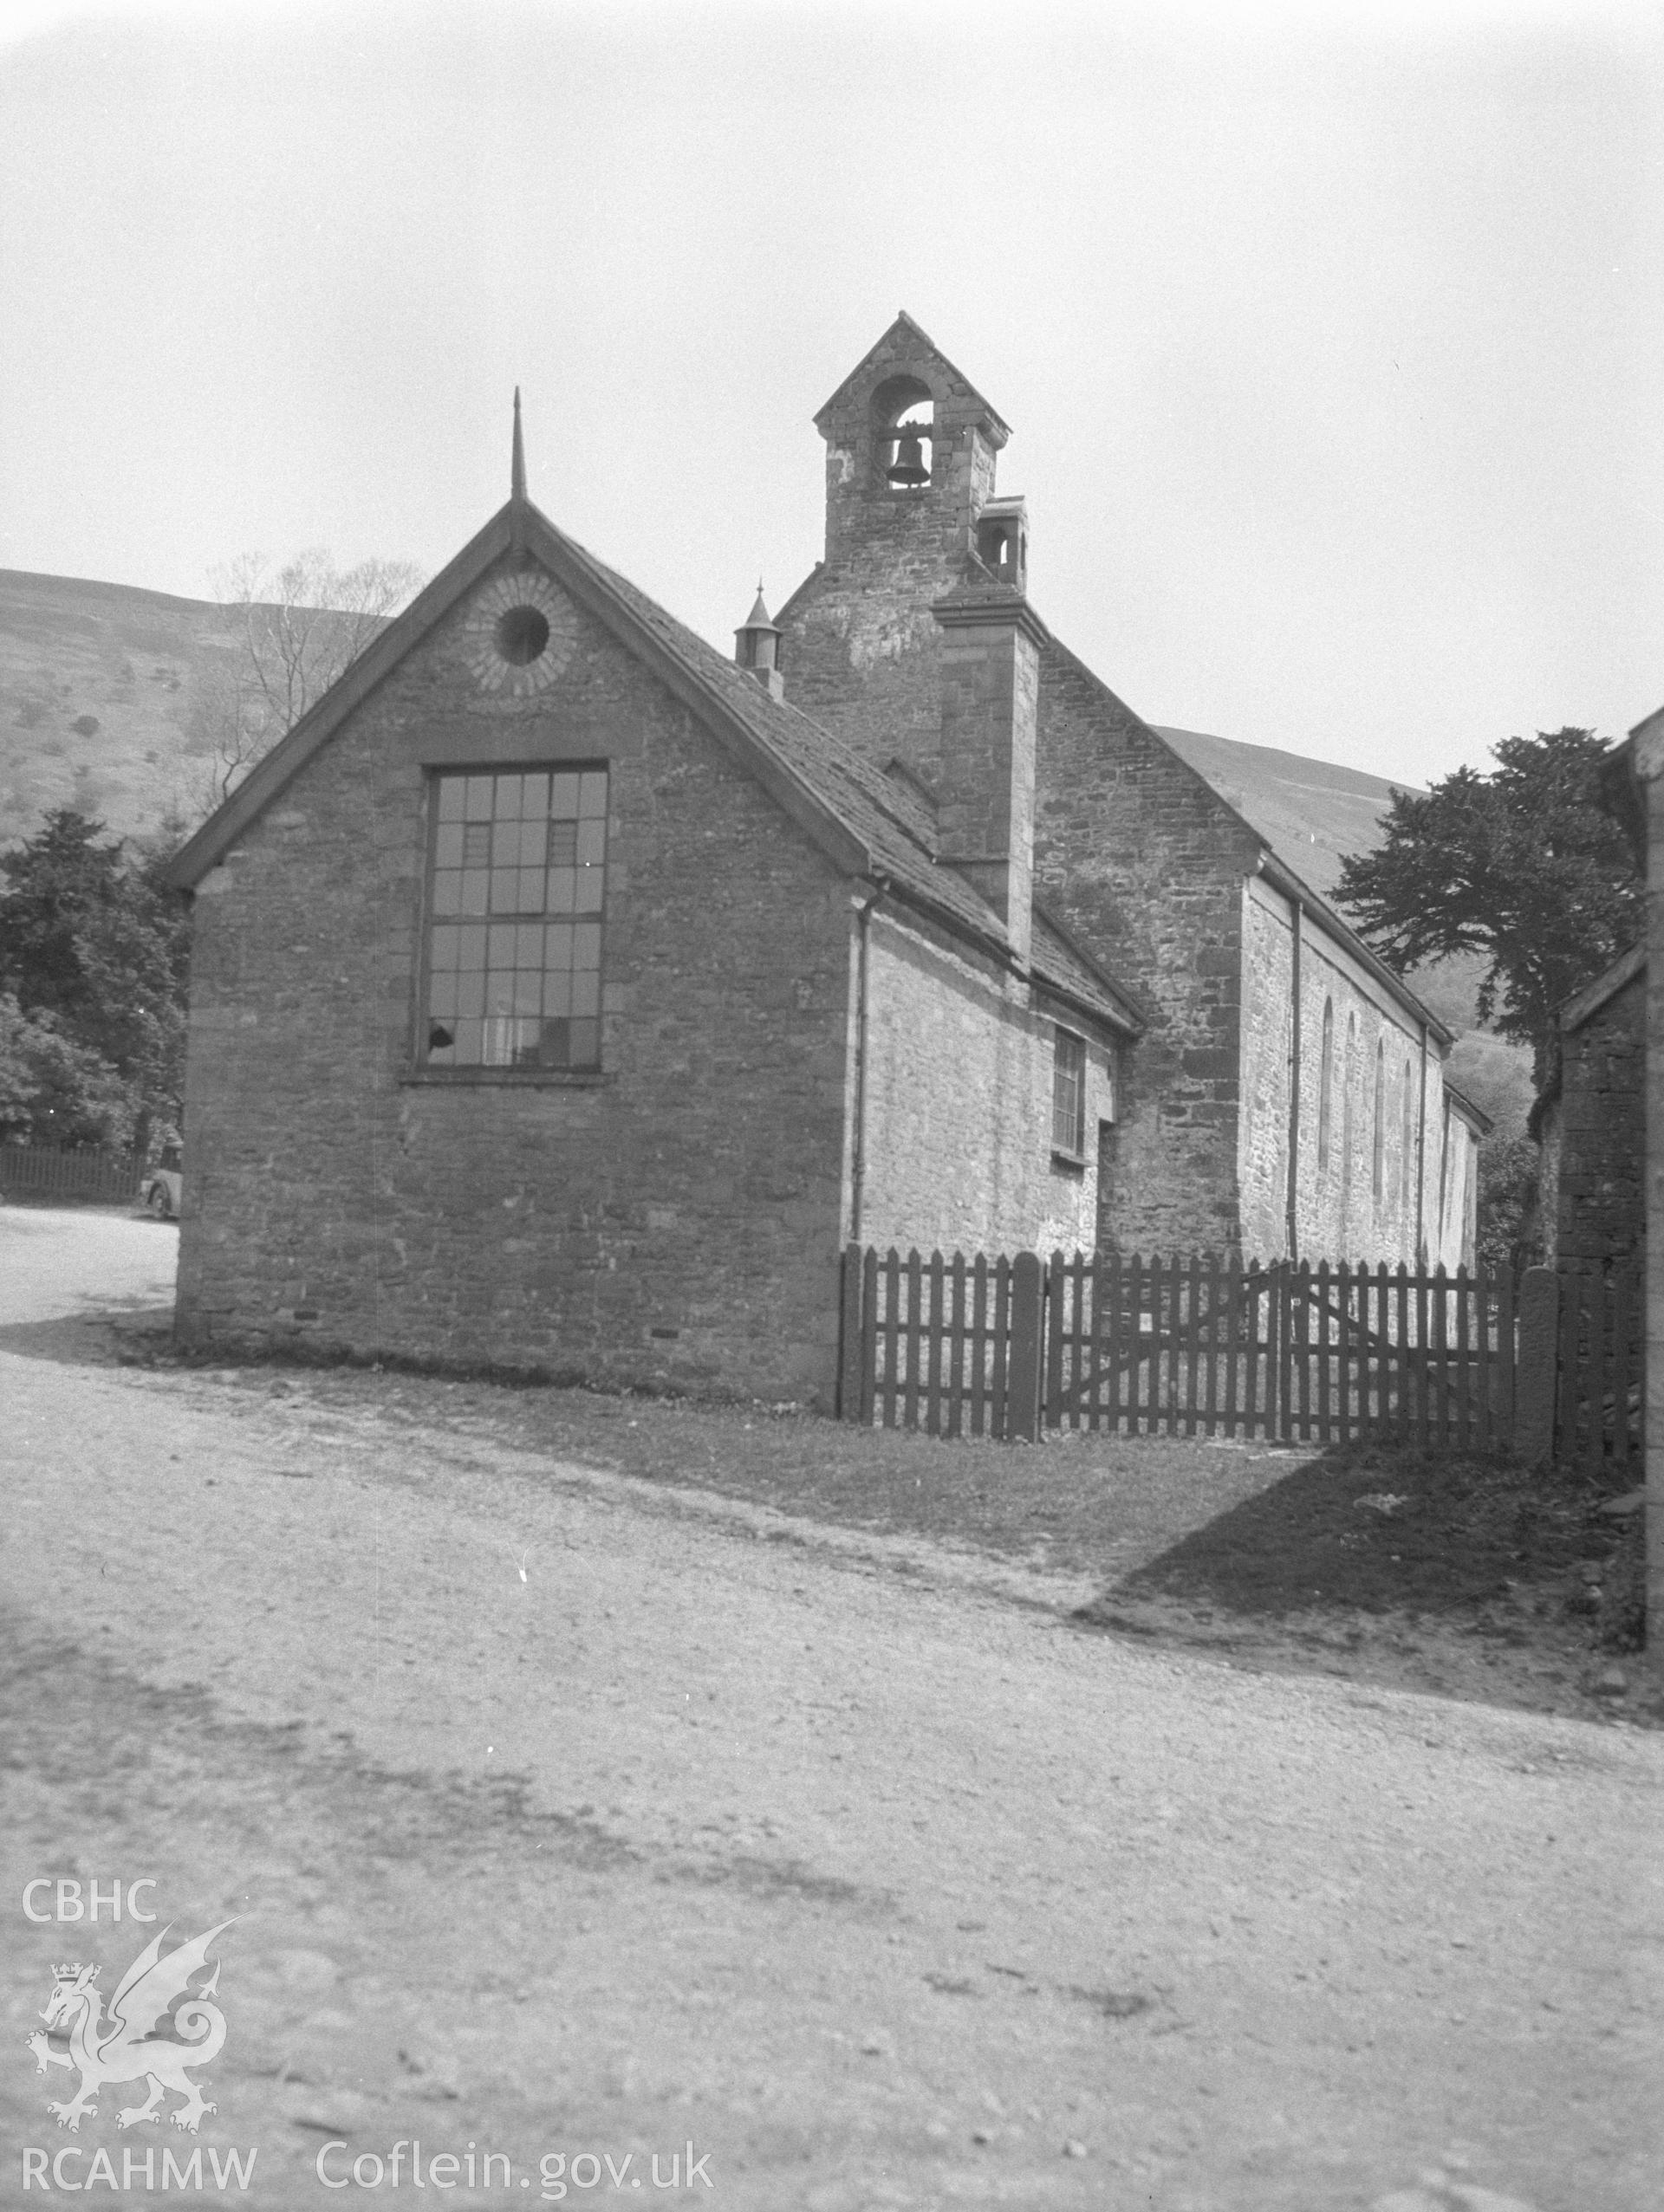 Digital copy of a nitrate negative showing exterior view of rear elevation of St. David, Llanthnoy. From the National Building Record Postcard Collection.